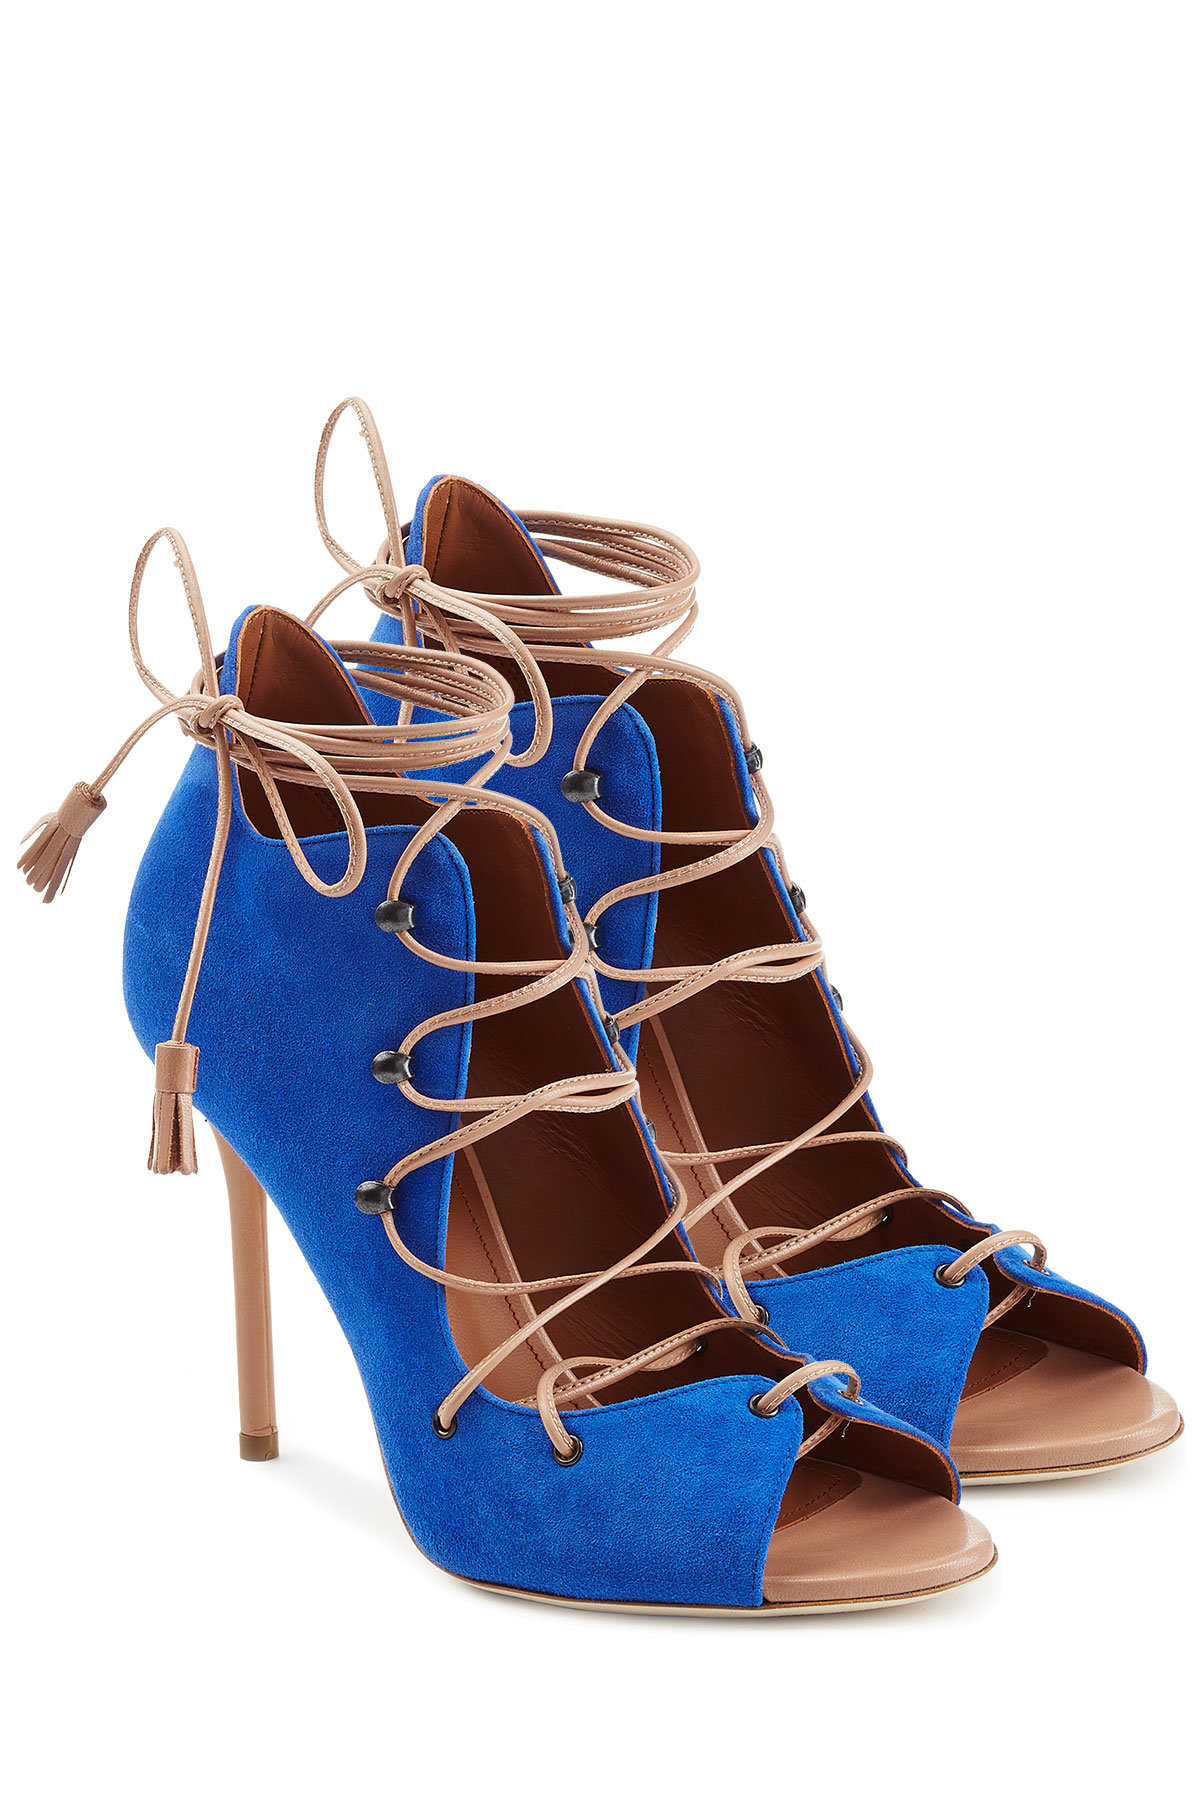 Malone Souliers - Sherry Suede Stiletto Sandals